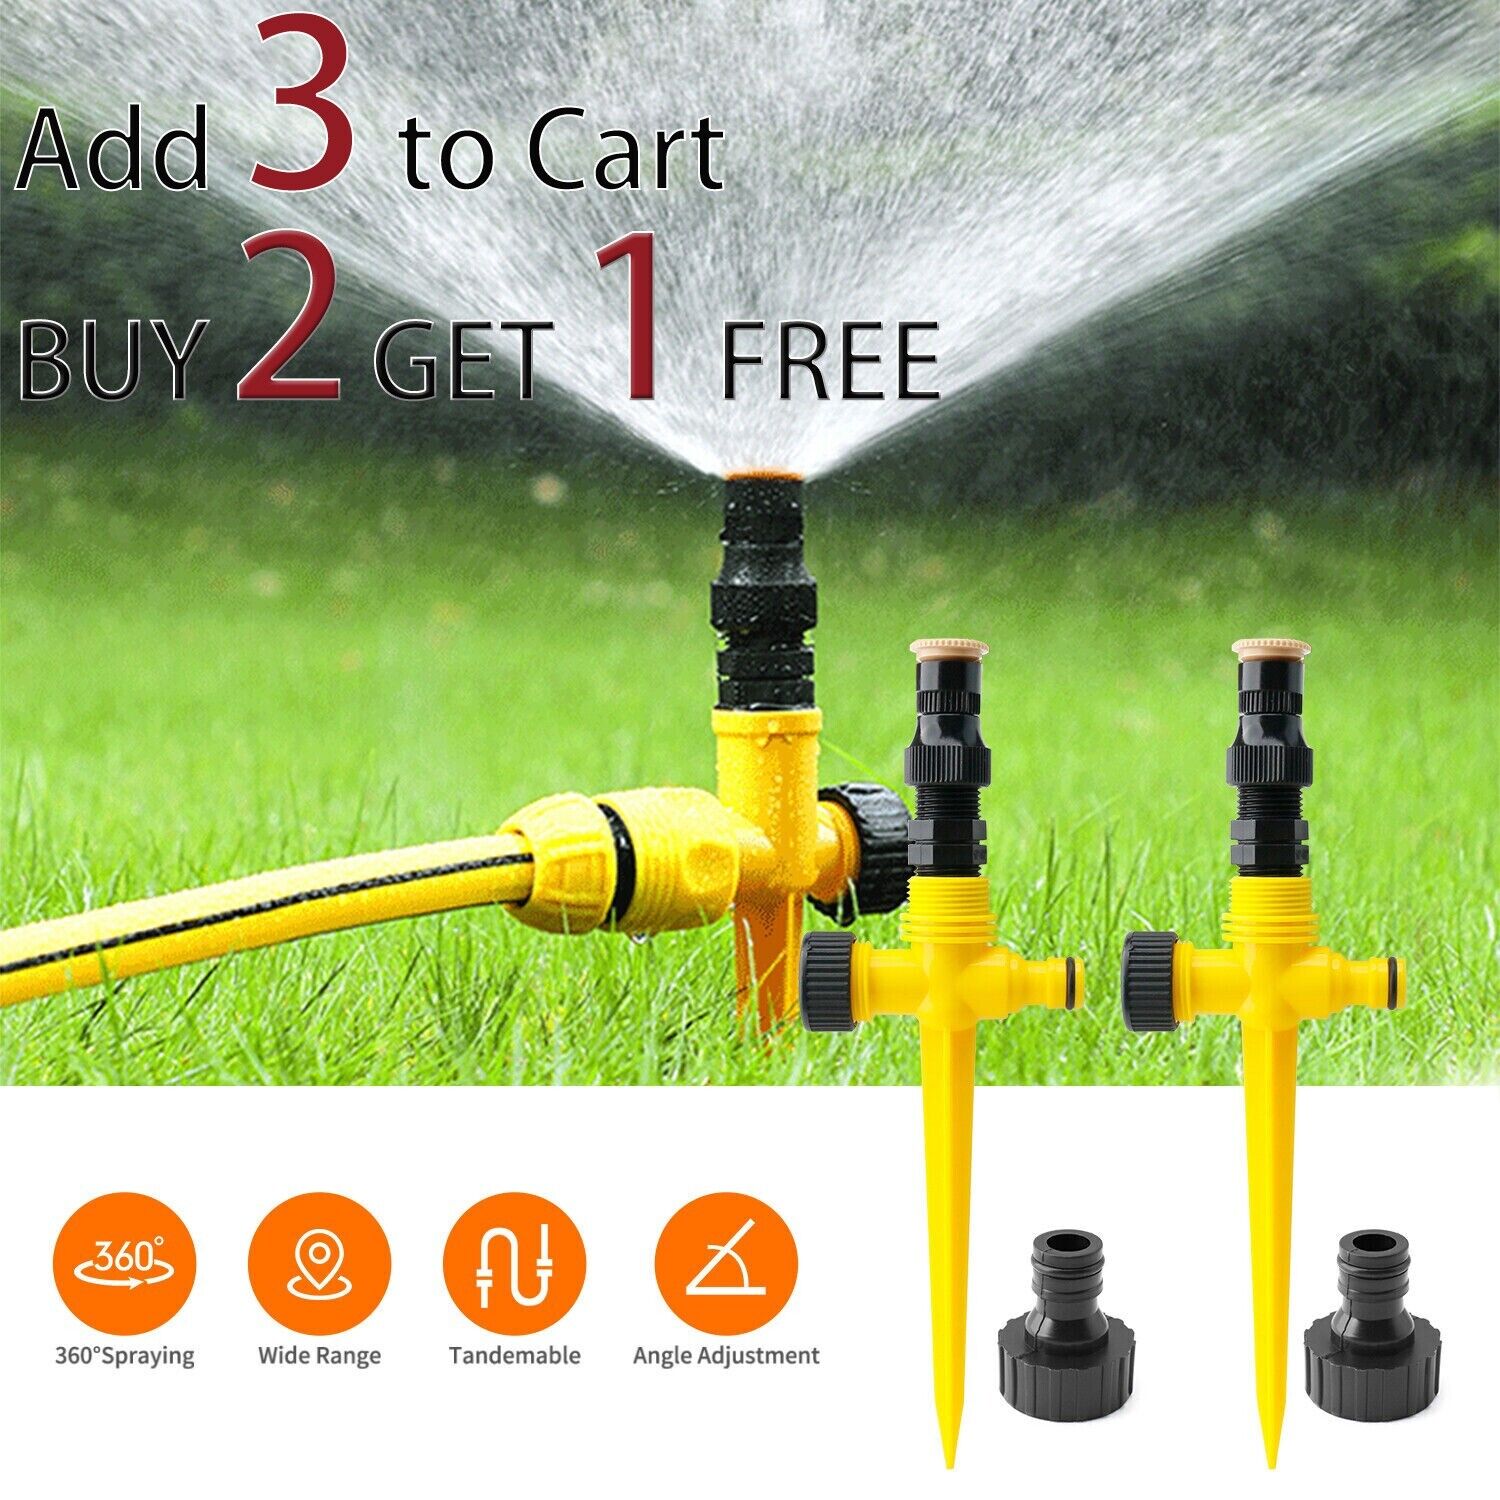 360° Rotation Auto Irrigation System Garden Lawn Sprinkler Patio Save Water USA